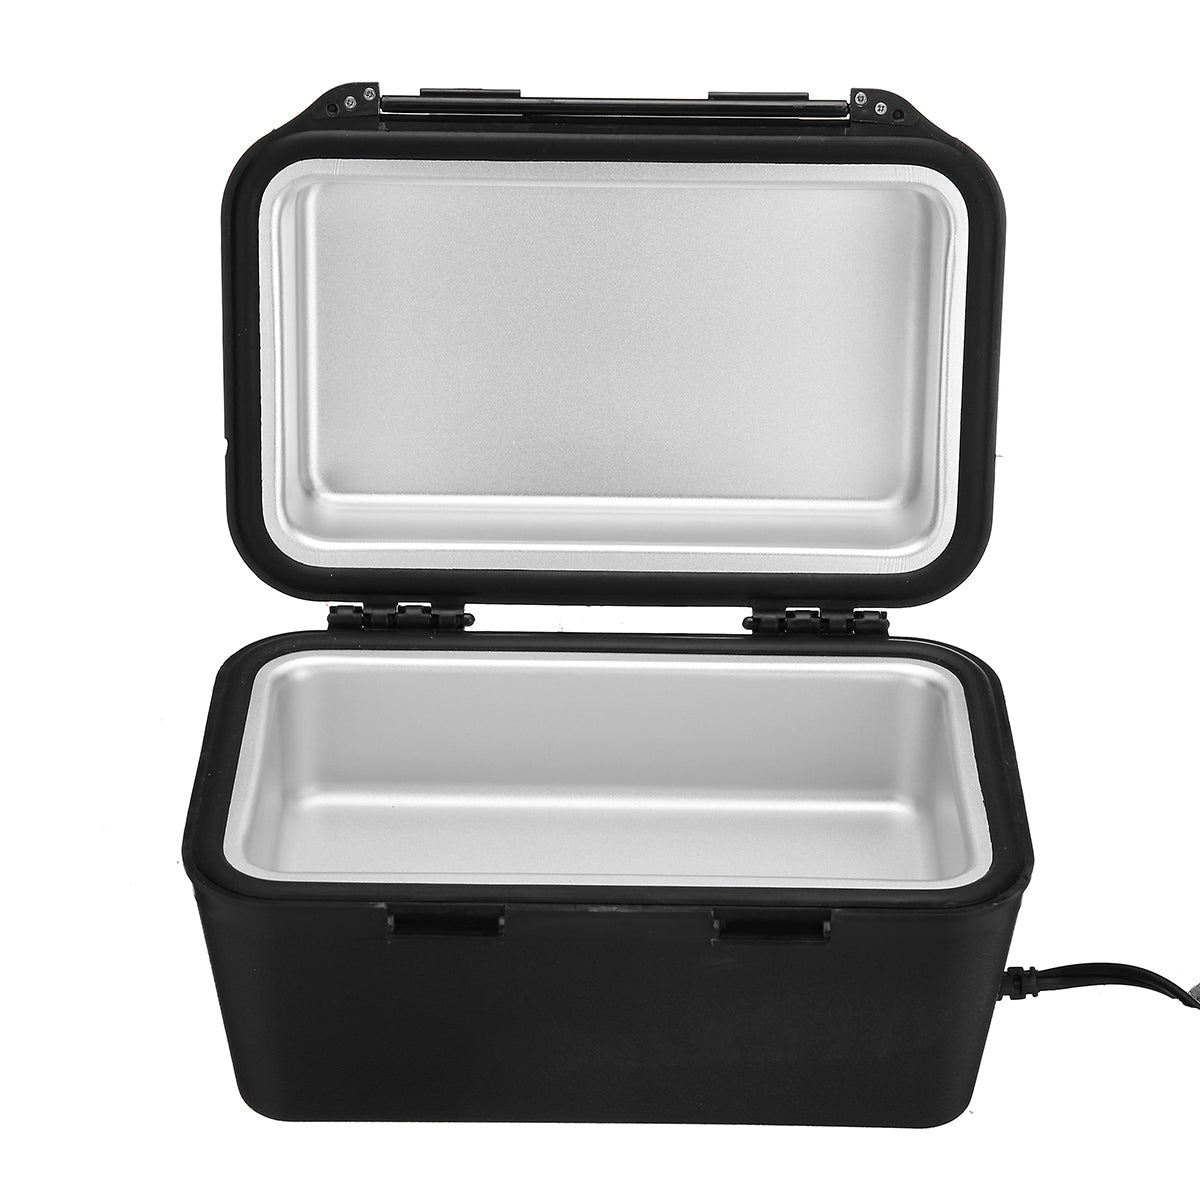 Gray DC 12V Car Electric Food Warmer Fast Heating Lunch Box Bag Heated Kit Container